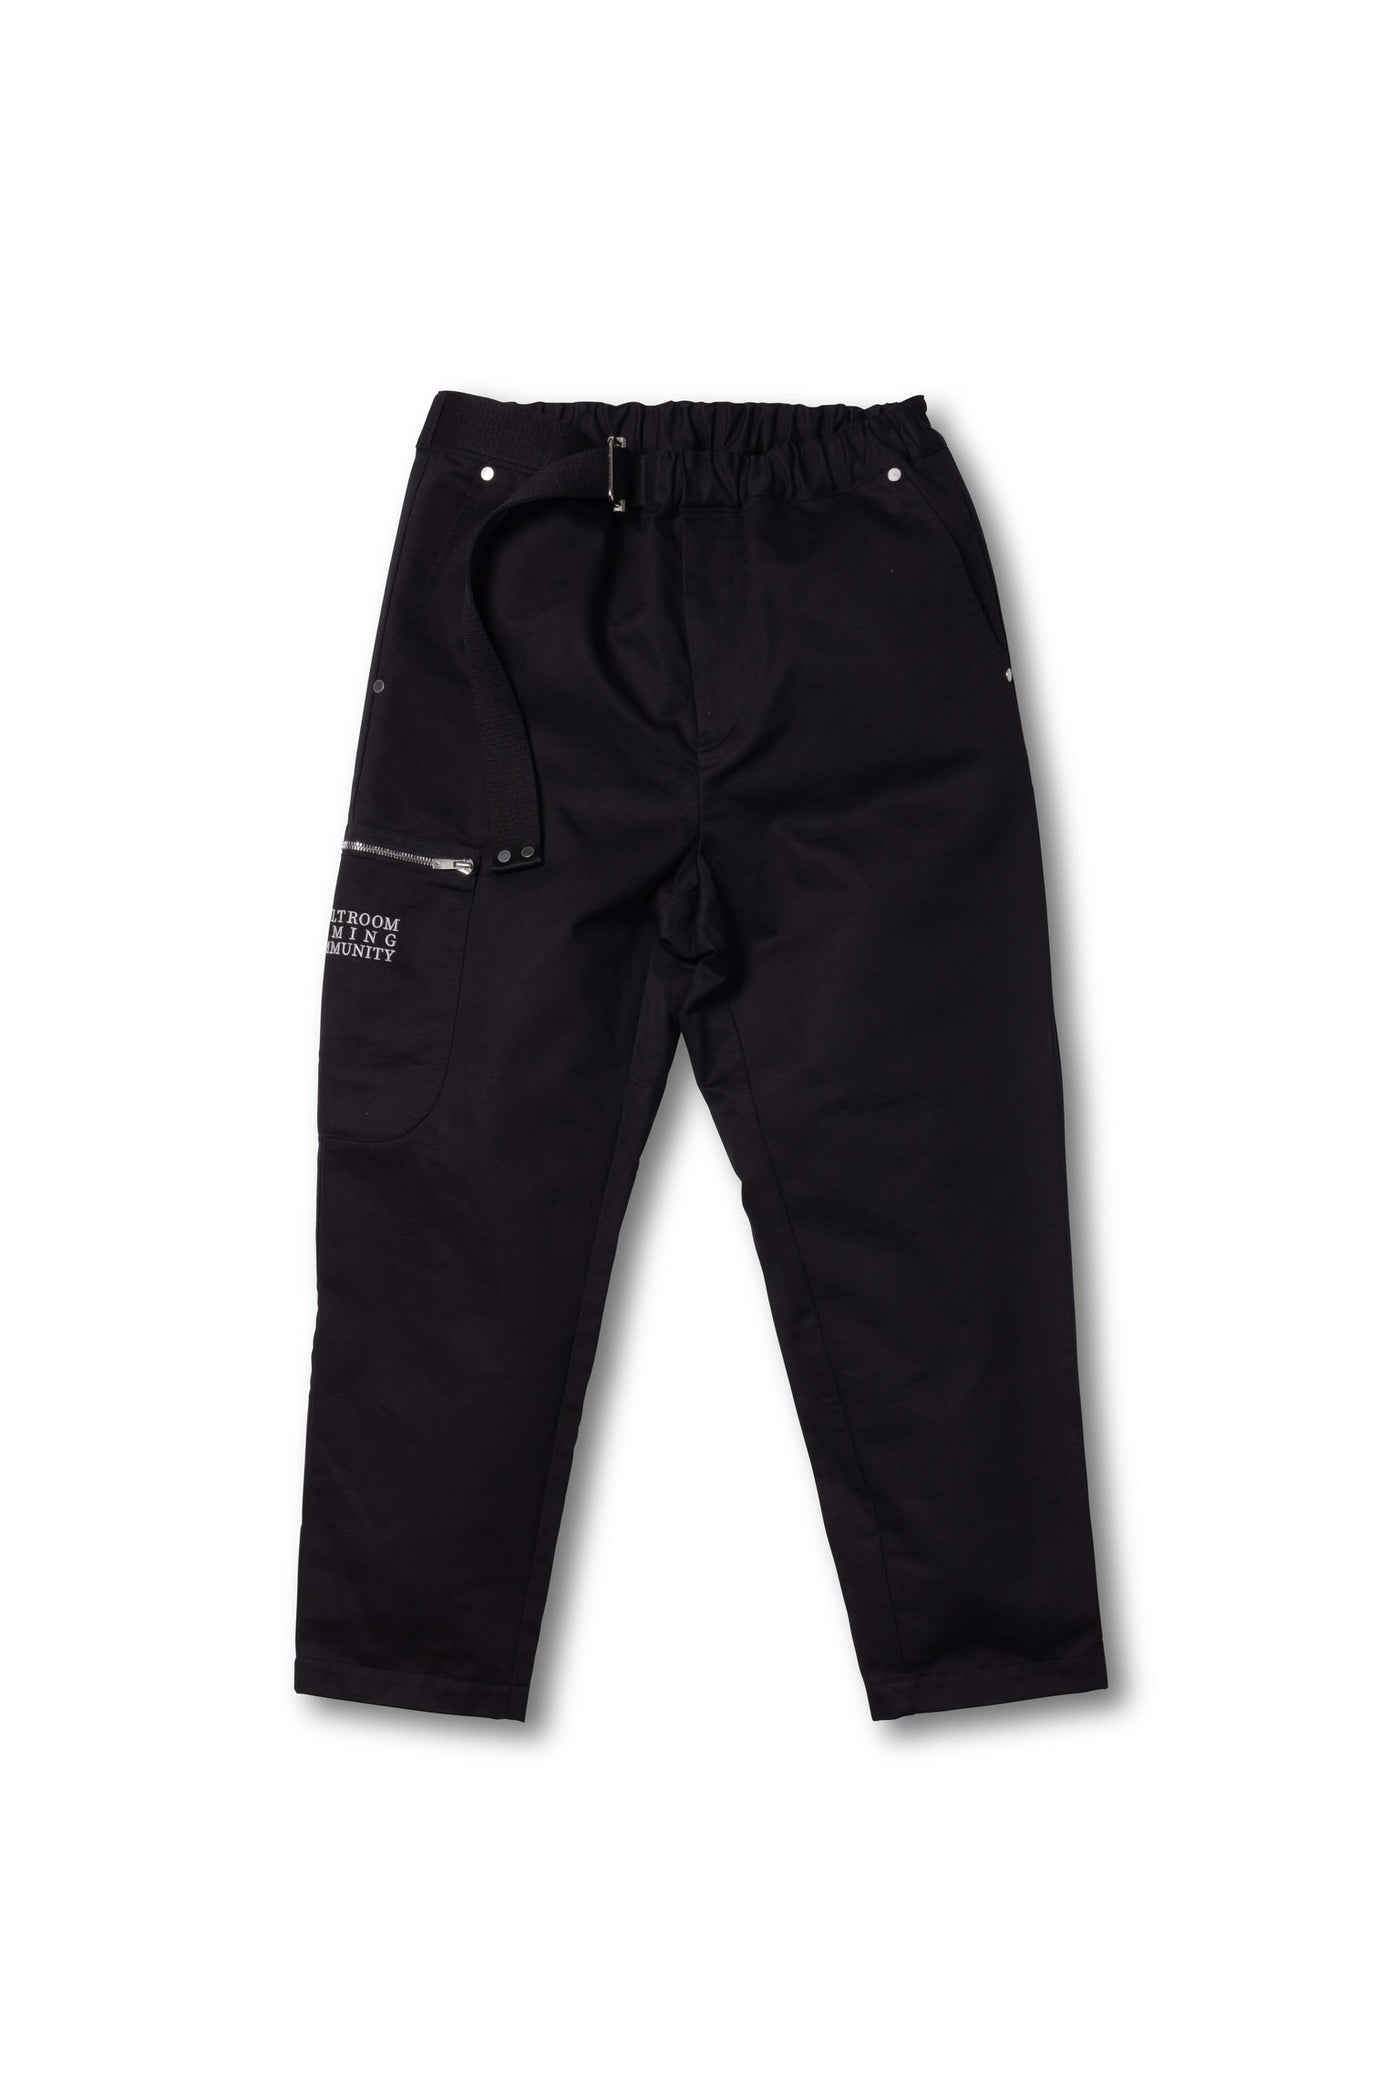 vaultroom】VGC CROPPED TROUSERS L-